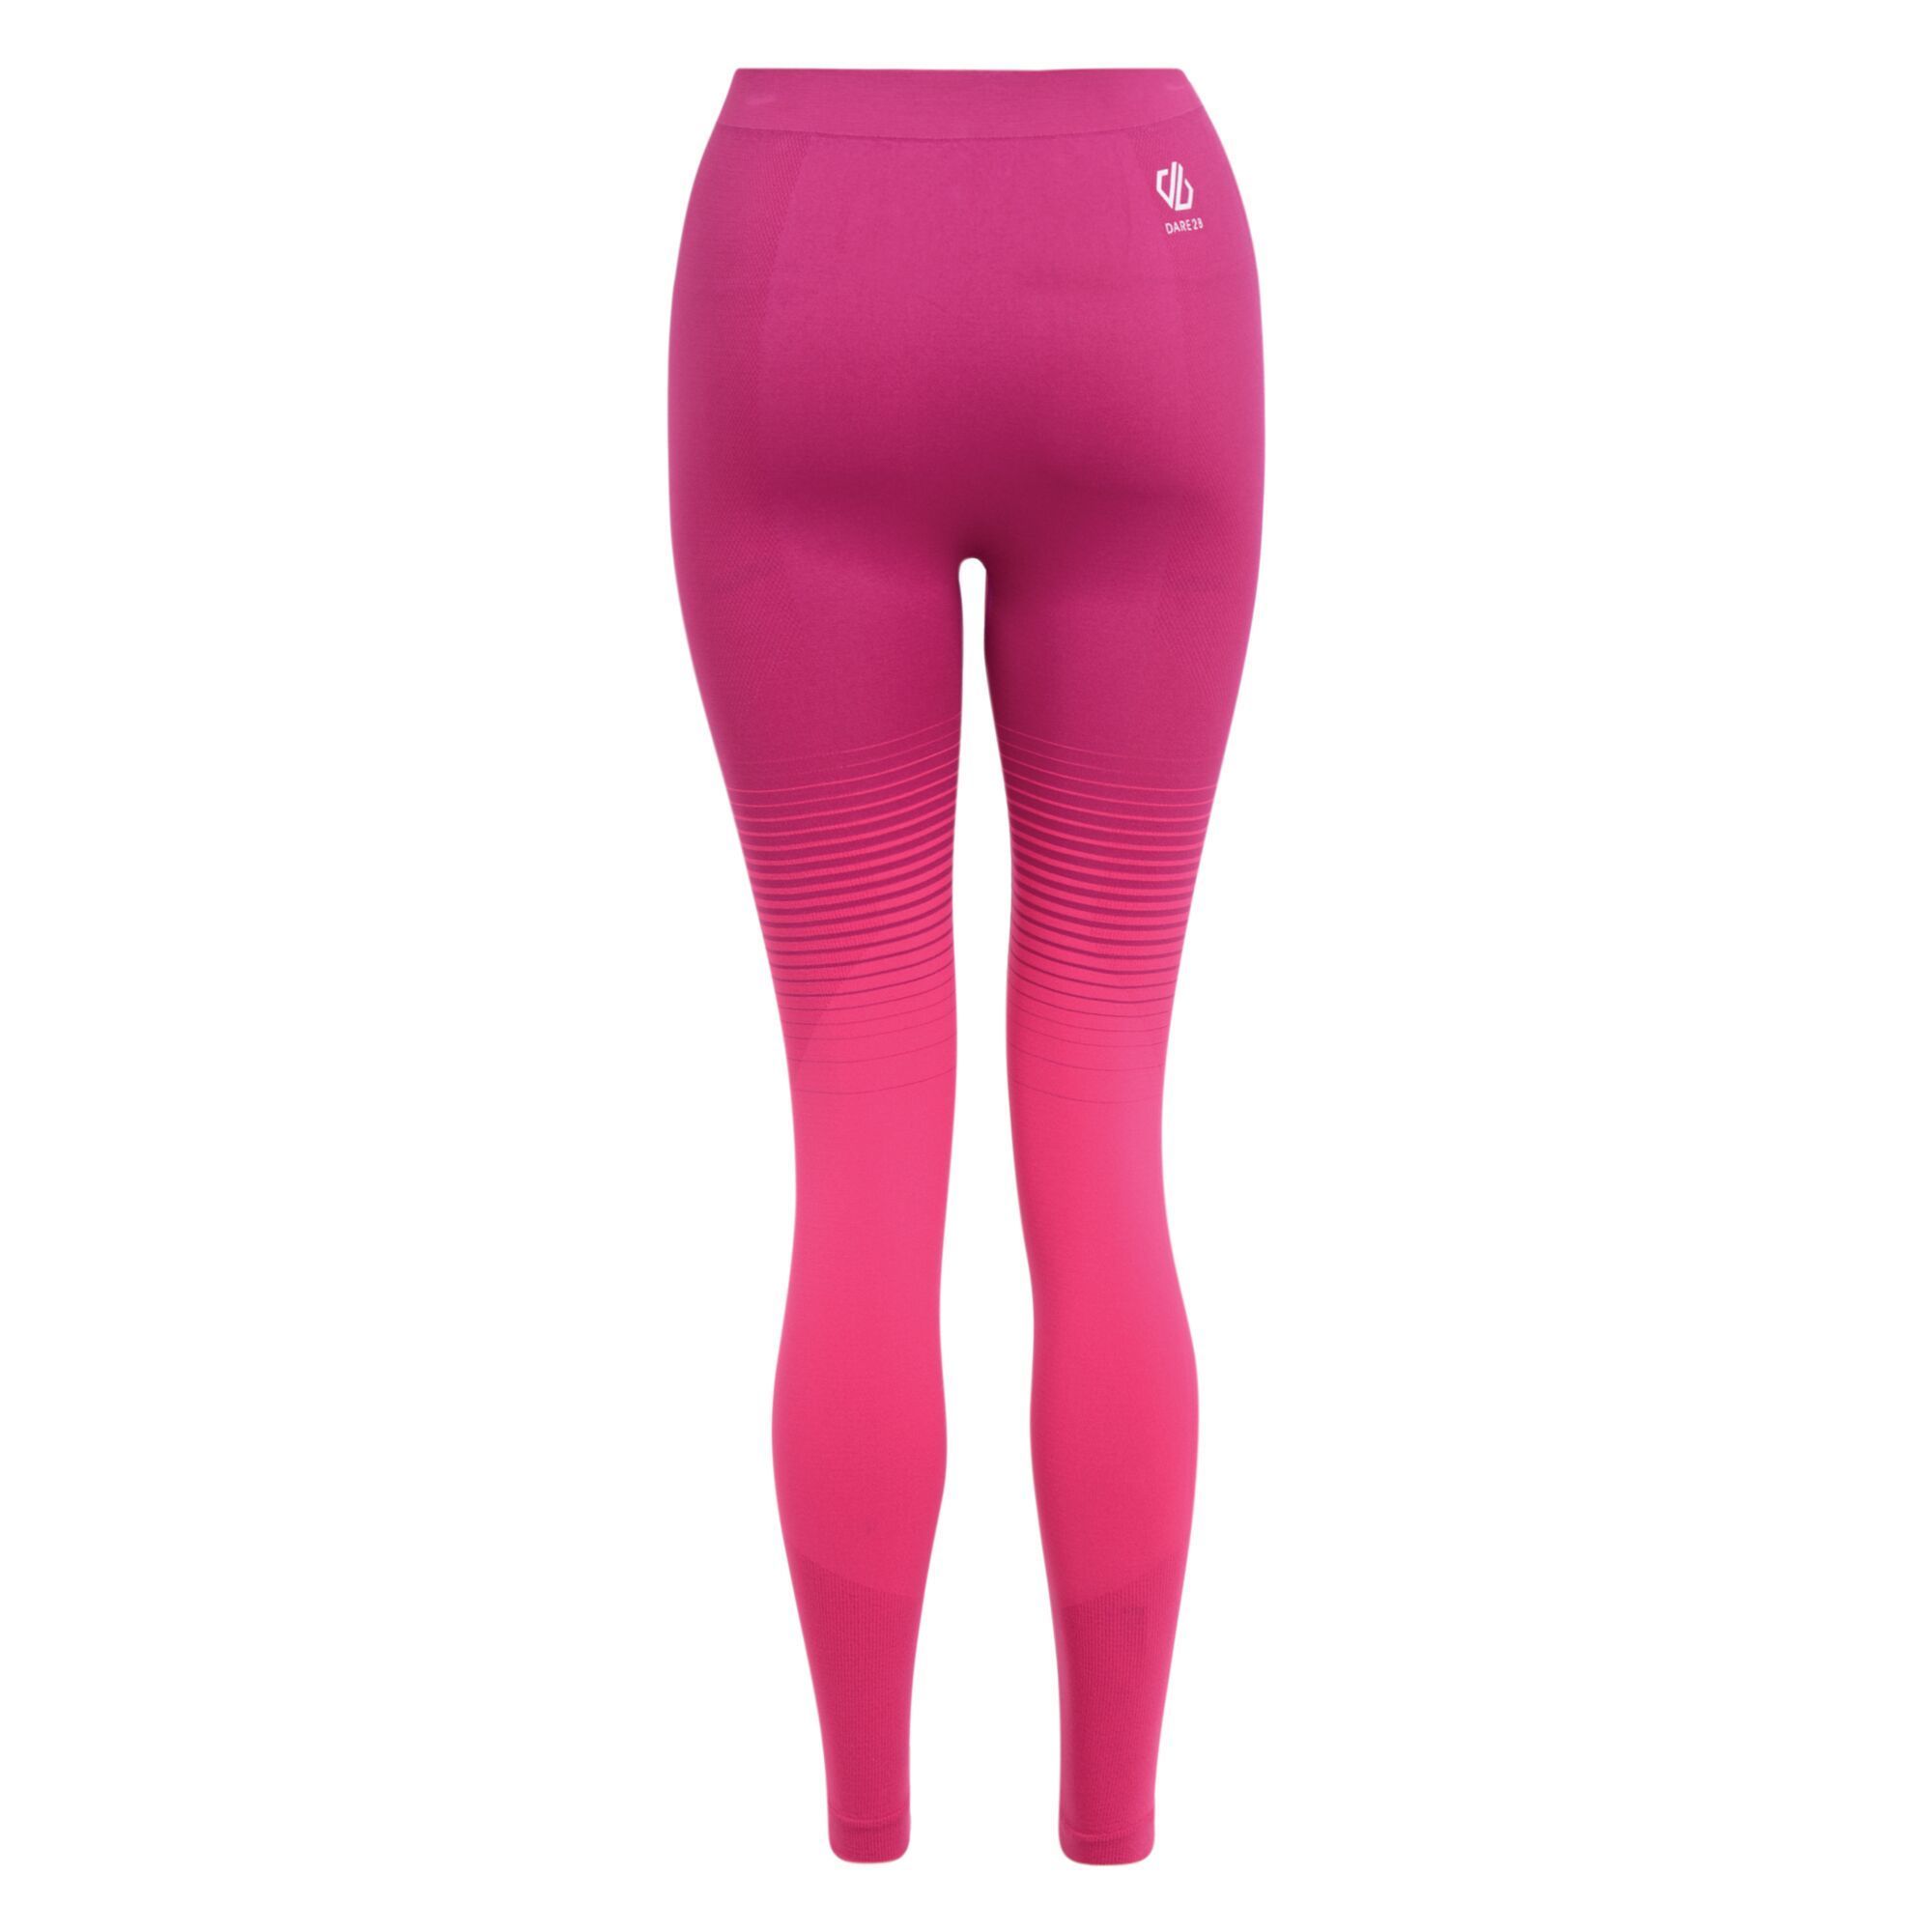 Elastane (8%), Polyester (42%), Polyamide (50%). Performance base layer collection. SeamSmart Technology. Q-Wic Seamless knitted fabric. Ergonomic body map fit. Fast wicking and quick drying properties.  odour control treatment. Dare 2B Womens Trousers Sizing (waist approx): 6 (22in/56cm), 8 (24in/61cm), 10 (26in/66cm), 12 (28in/71cm), 14 (30in/76cm), 16 (32in/81cm), 18 (34in/86cm), 20 (36in/92cm).